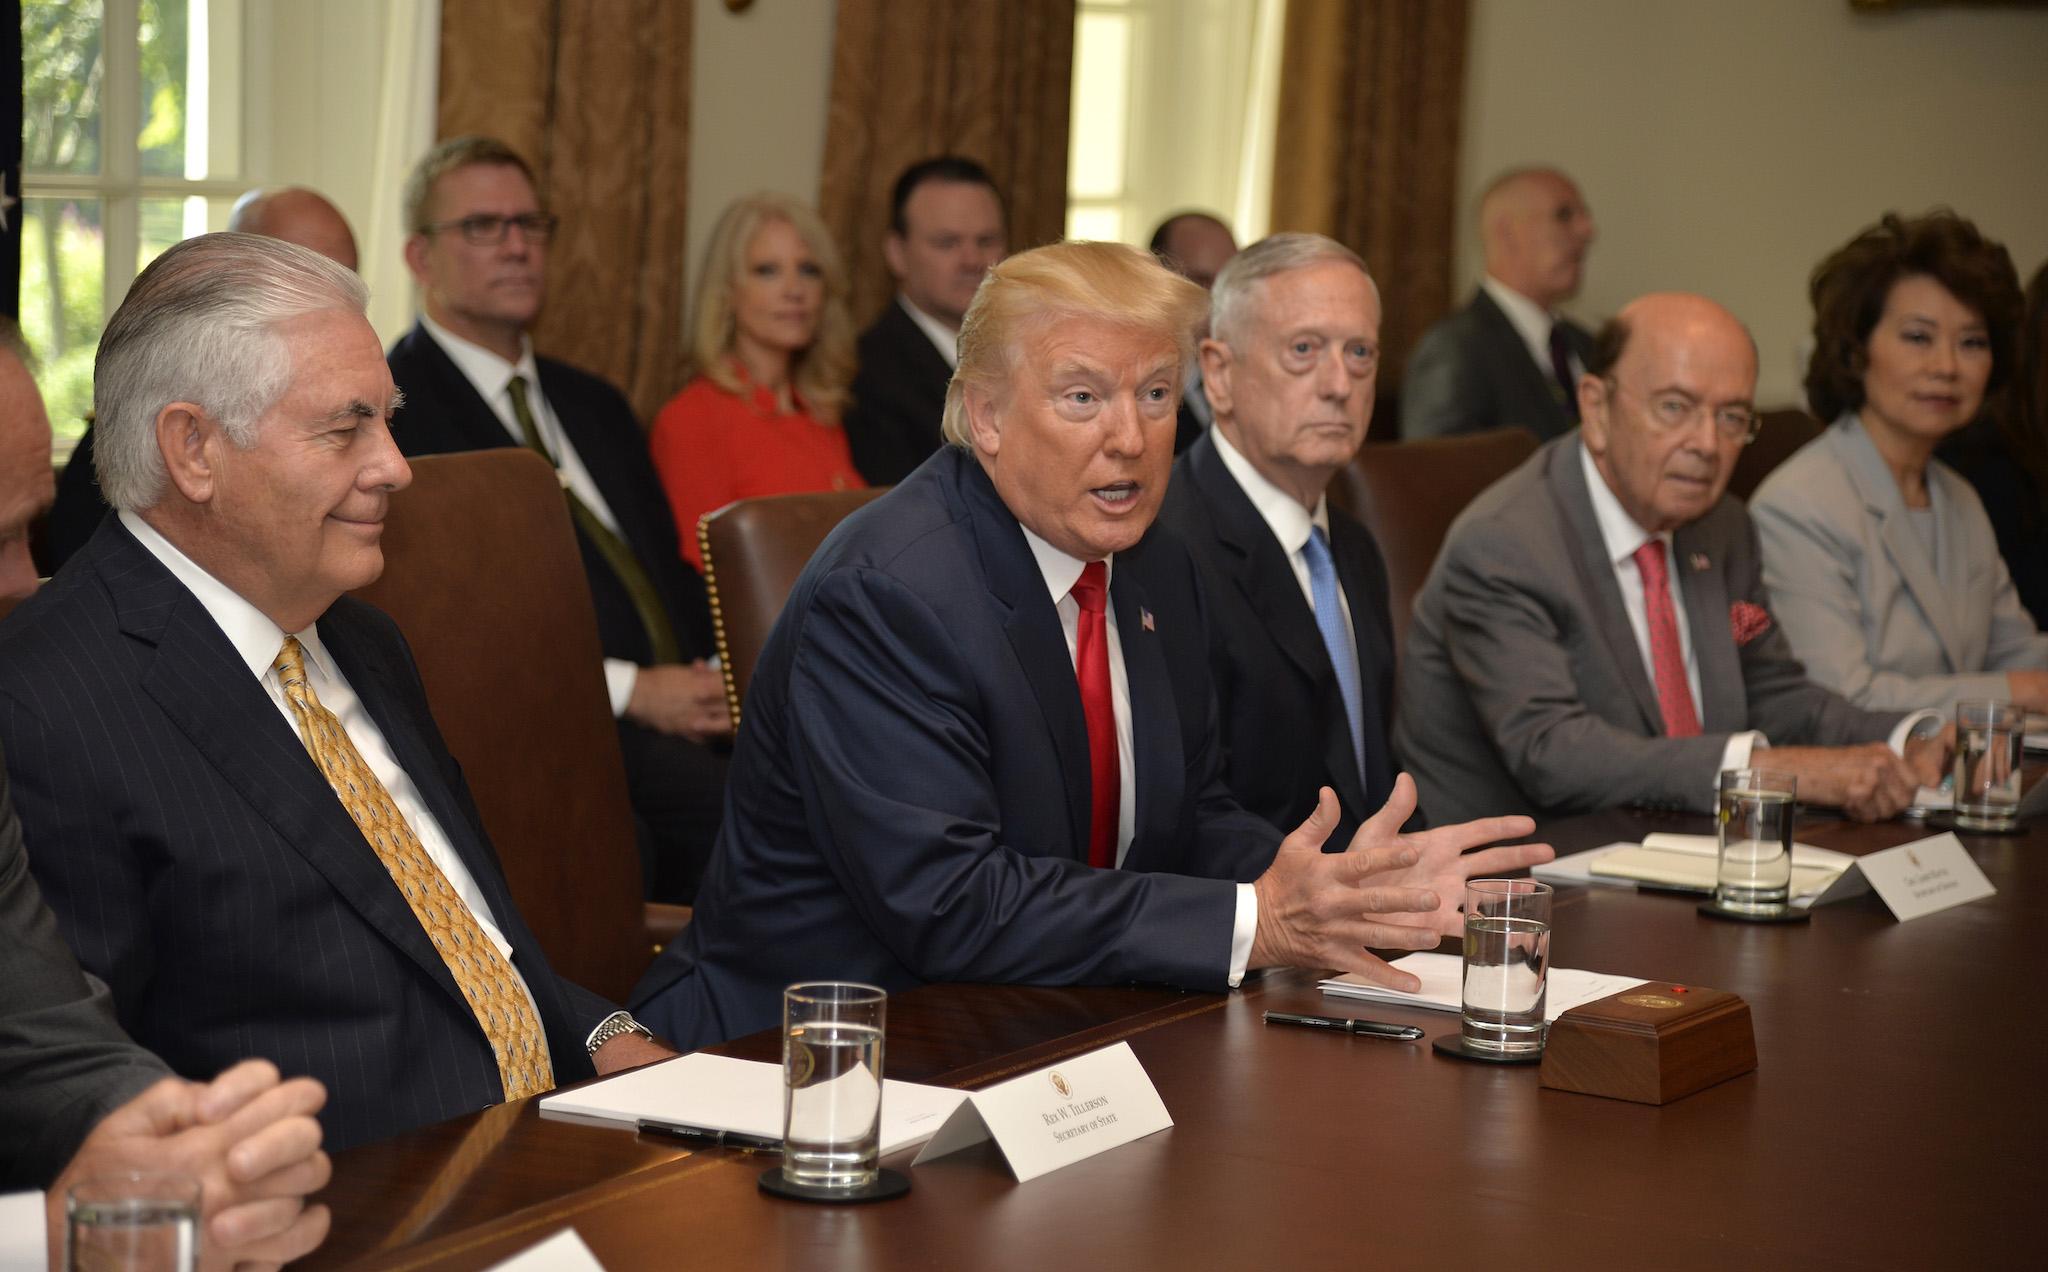 President Donald Trump makes remarks during a meeting of his cabinet